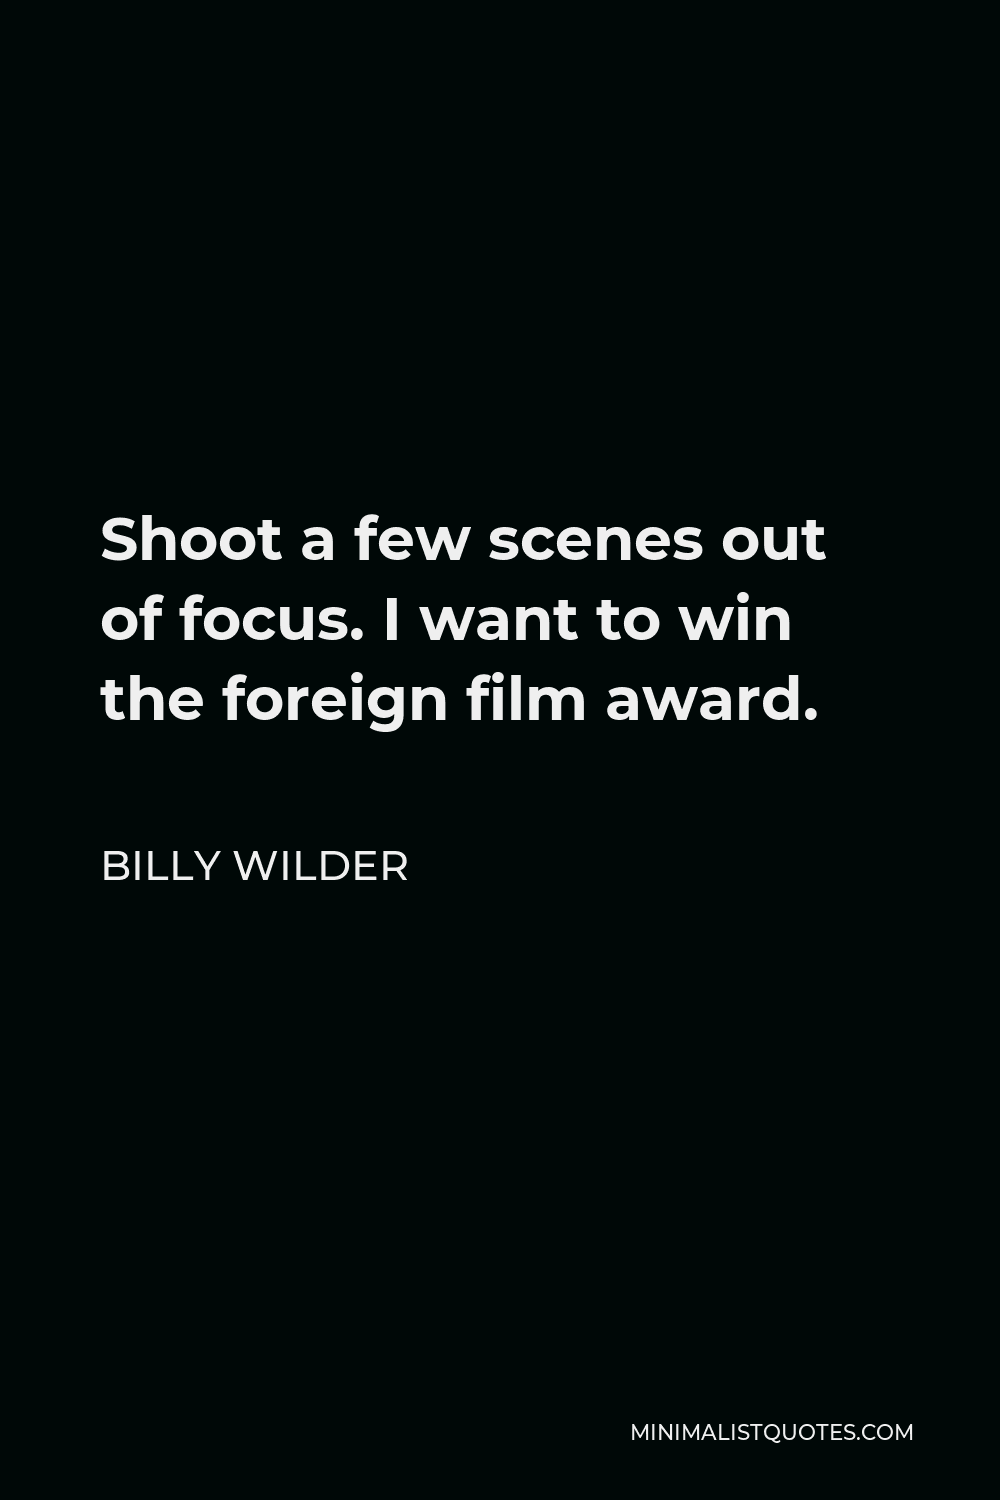 Billy Wilder Quote - Shoot a few scenes out of focus. I want to win the foreign film award.